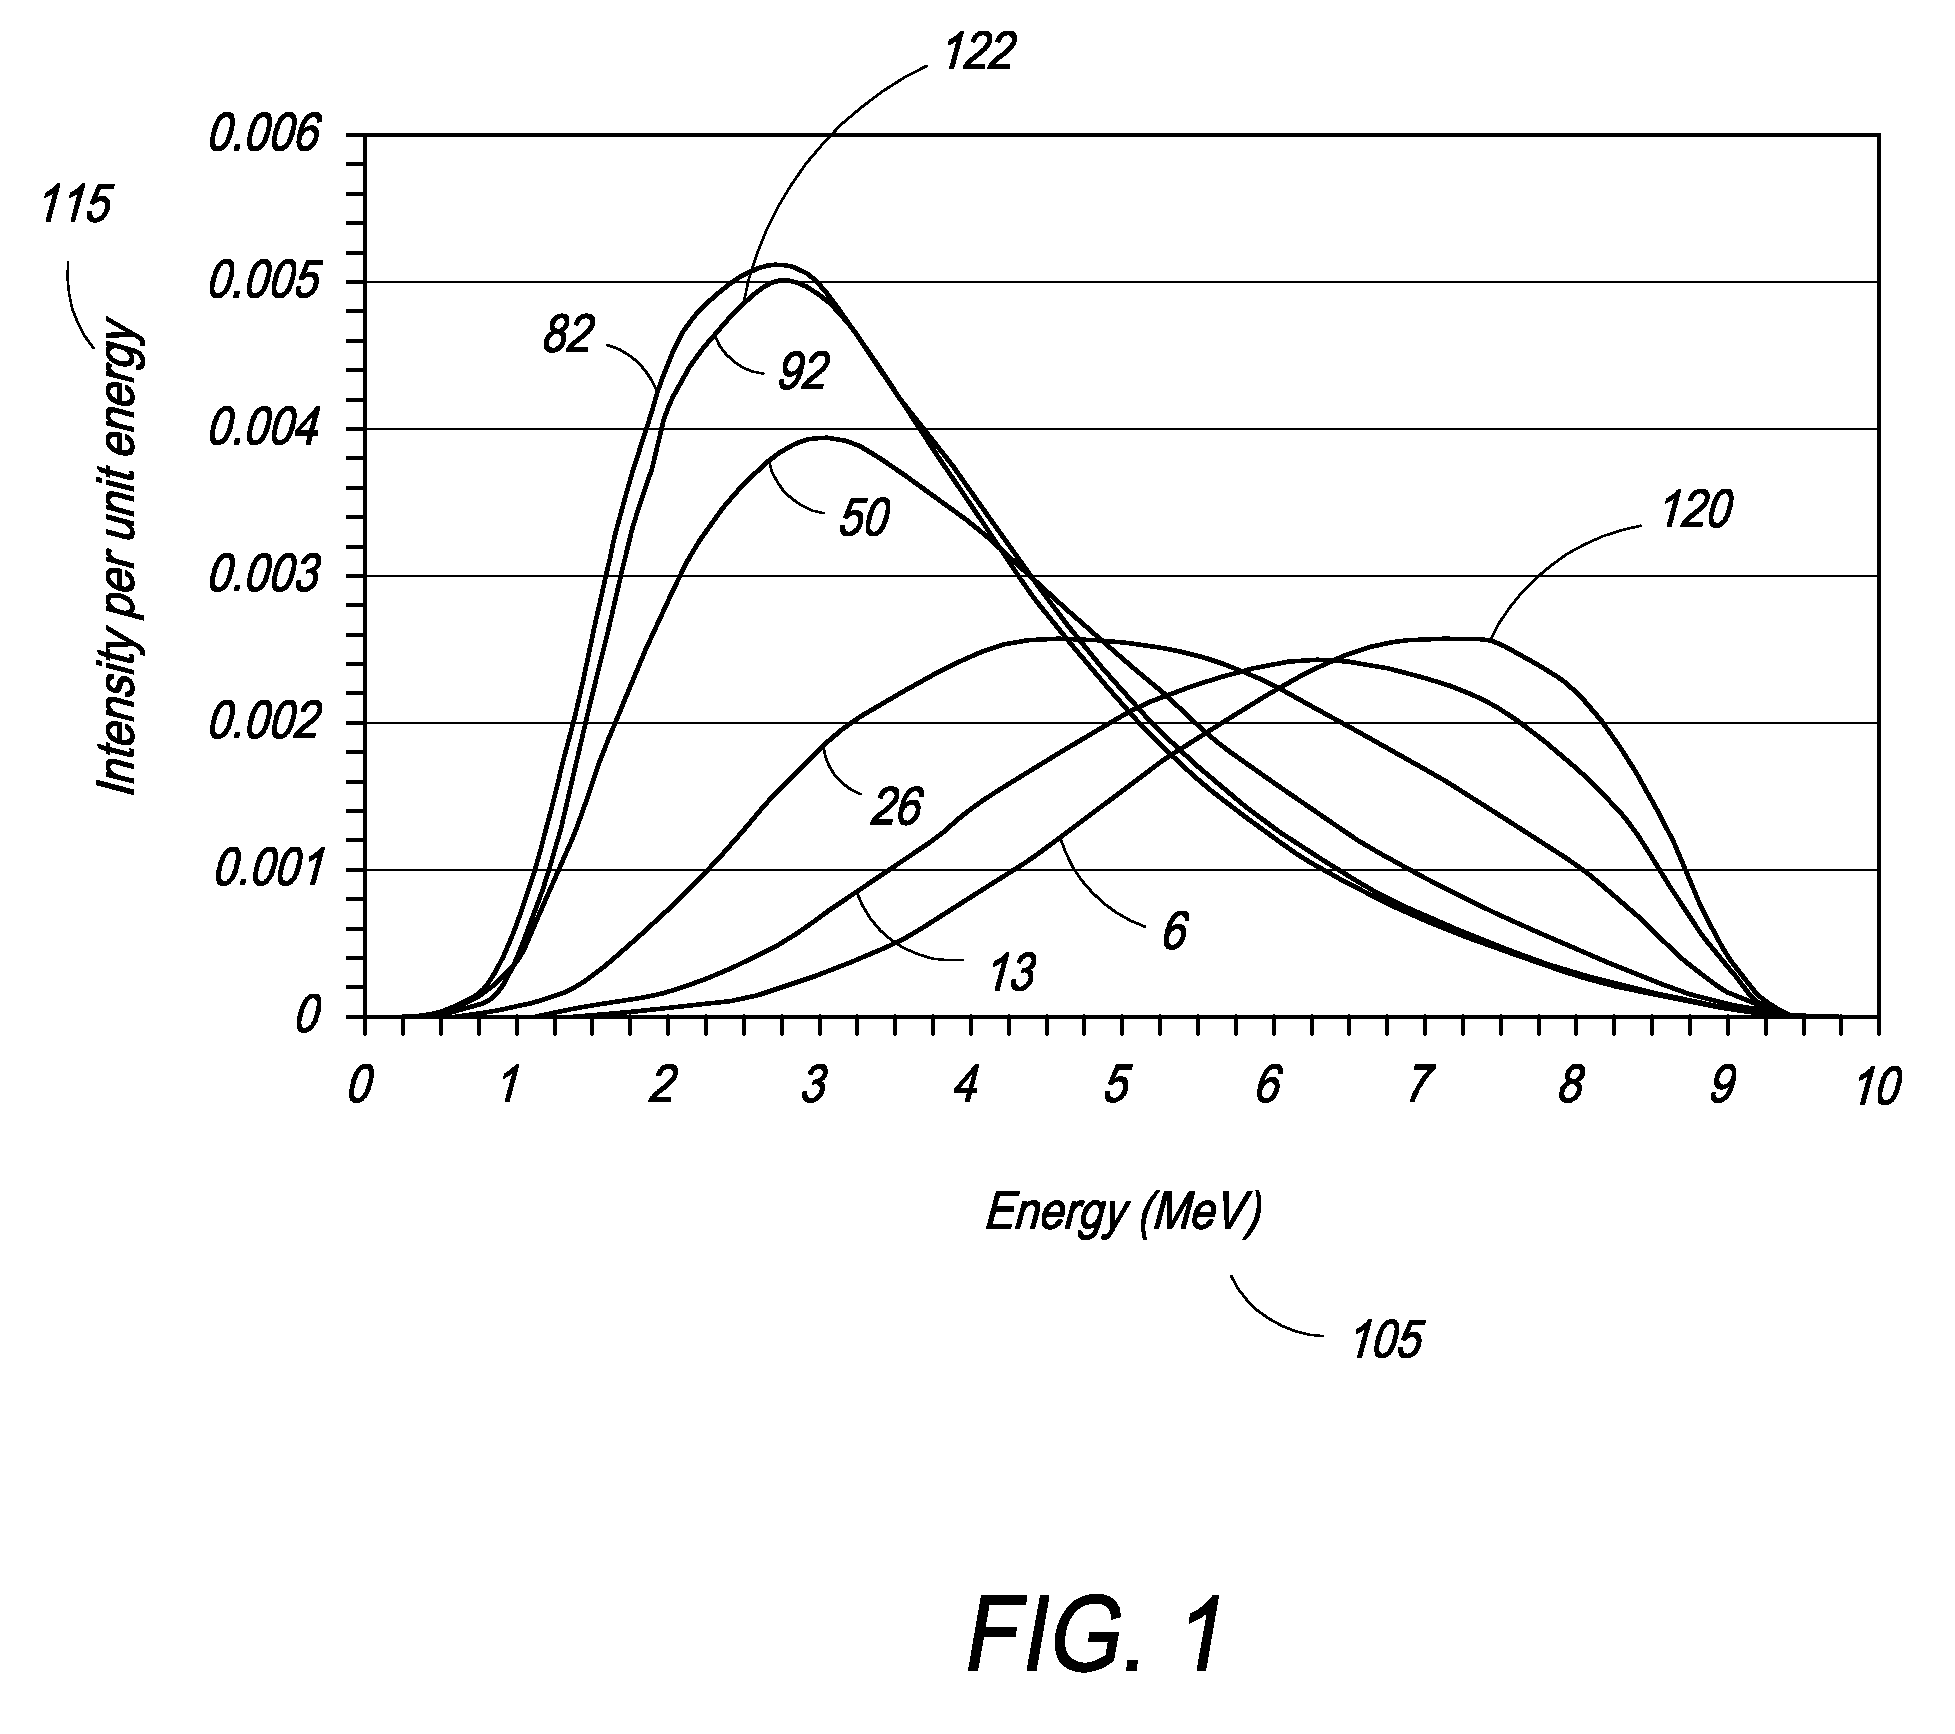 High-energy X-ray-spectroscopy-based inspection system and methods to determine the atomic number of materials